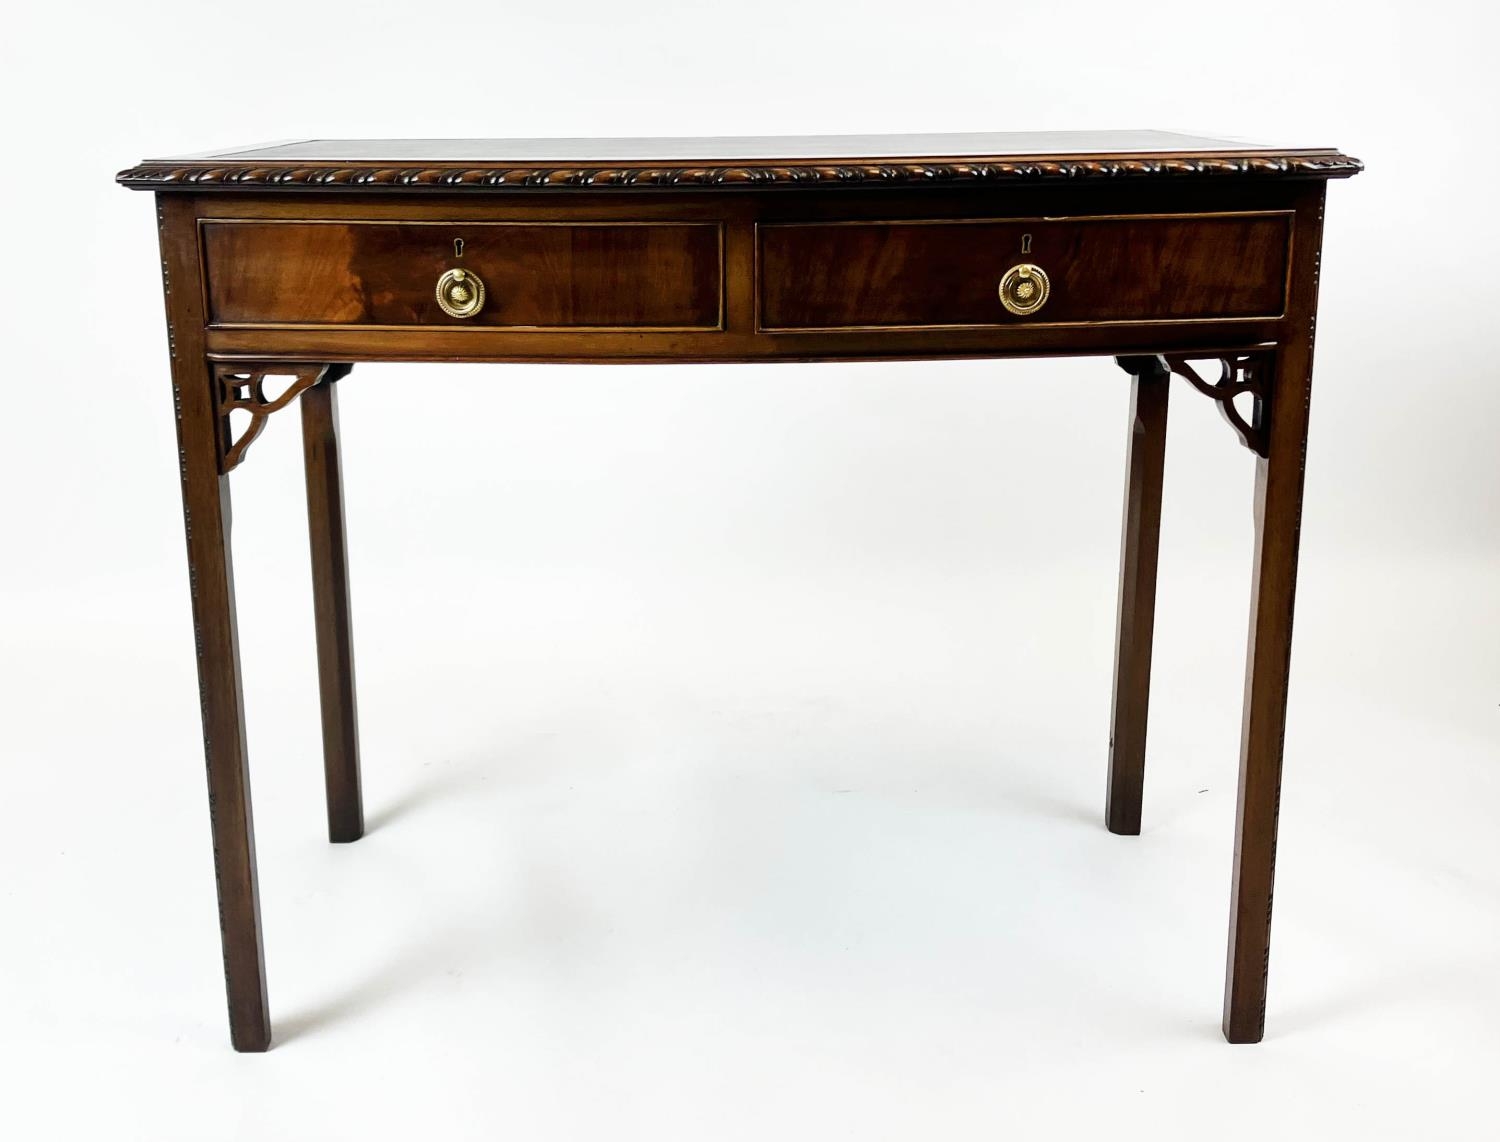 BOWFRONT SIDE TABLE, early 20th century George II style, mahogany with two drawers with leather - Image 4 of 6